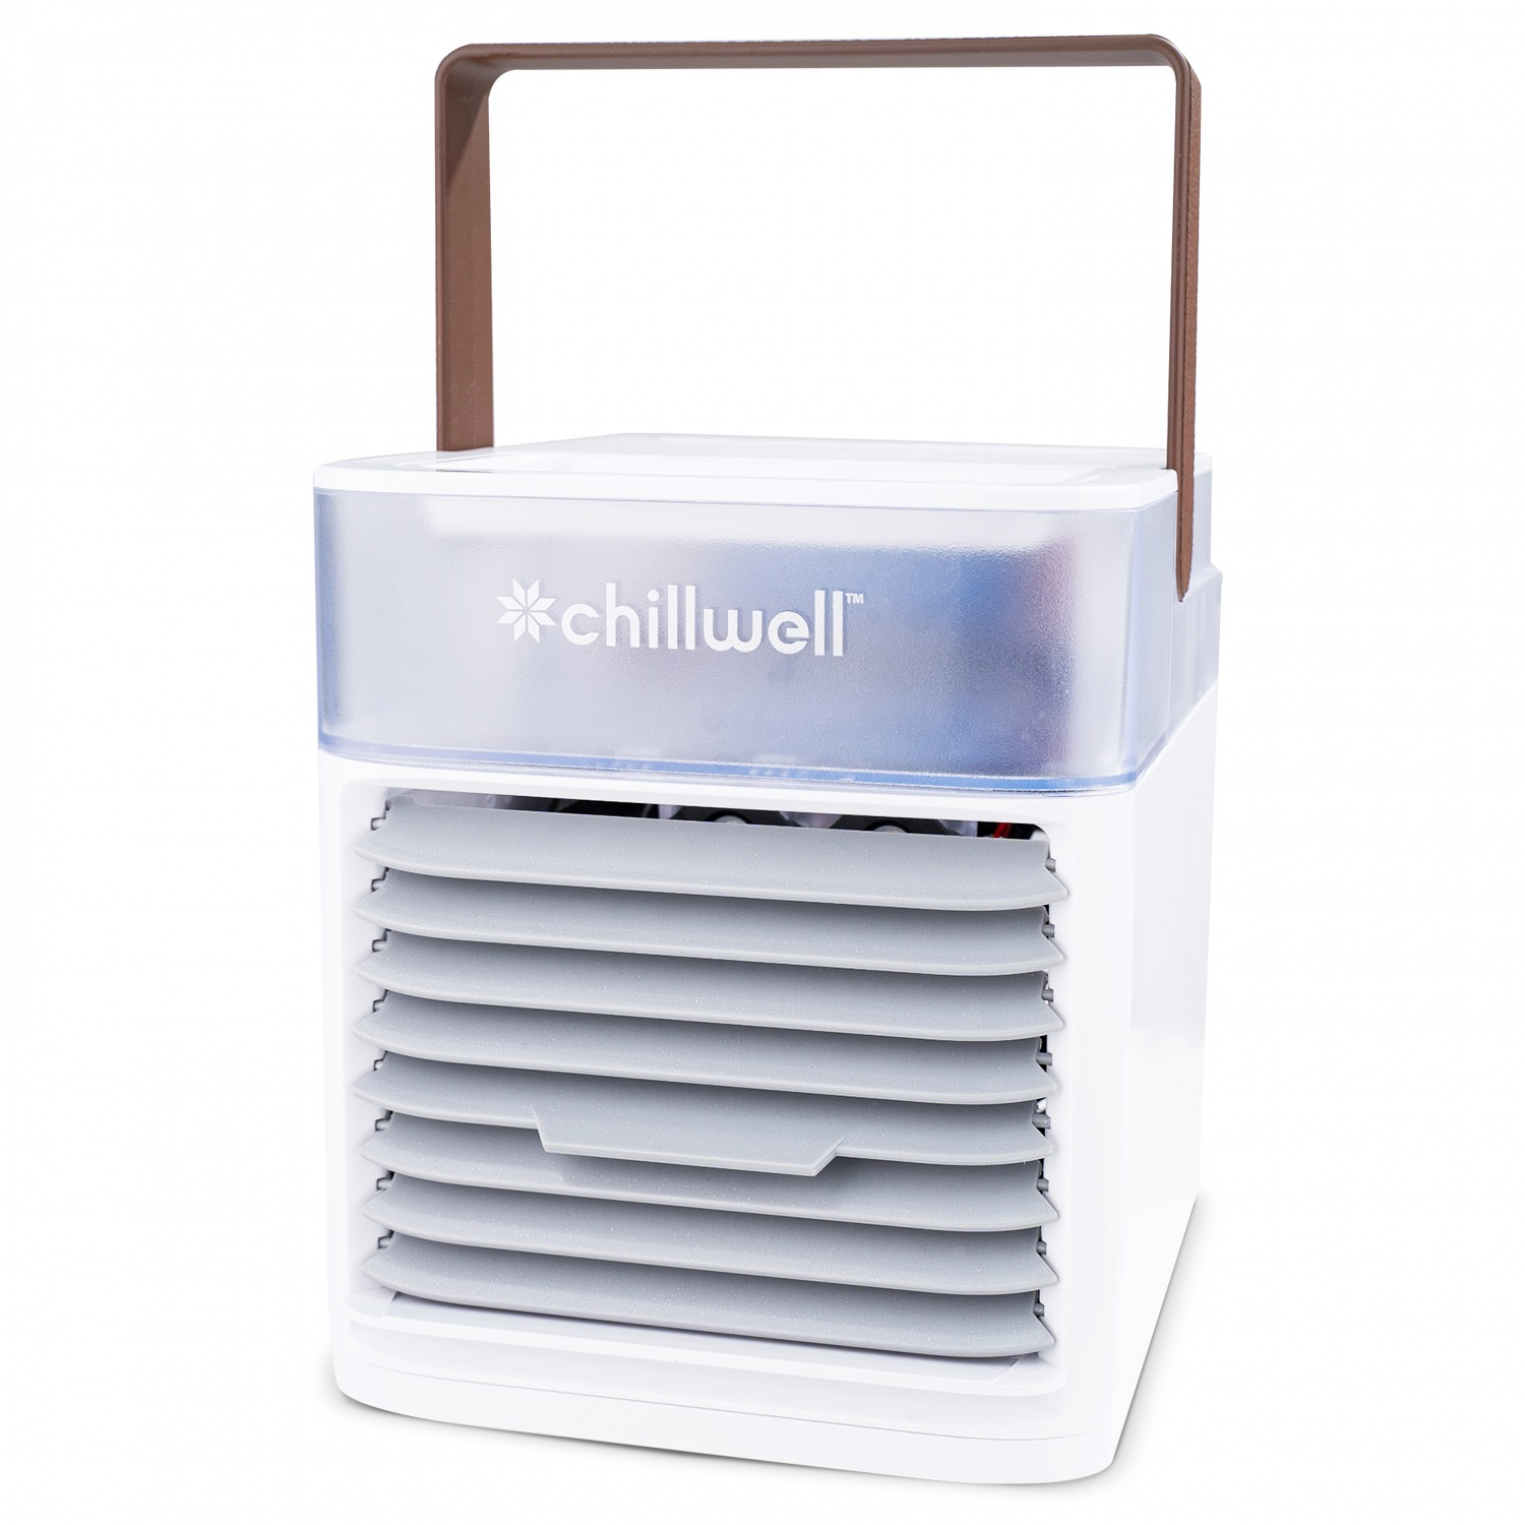 Chillwell AC Ice Cooler